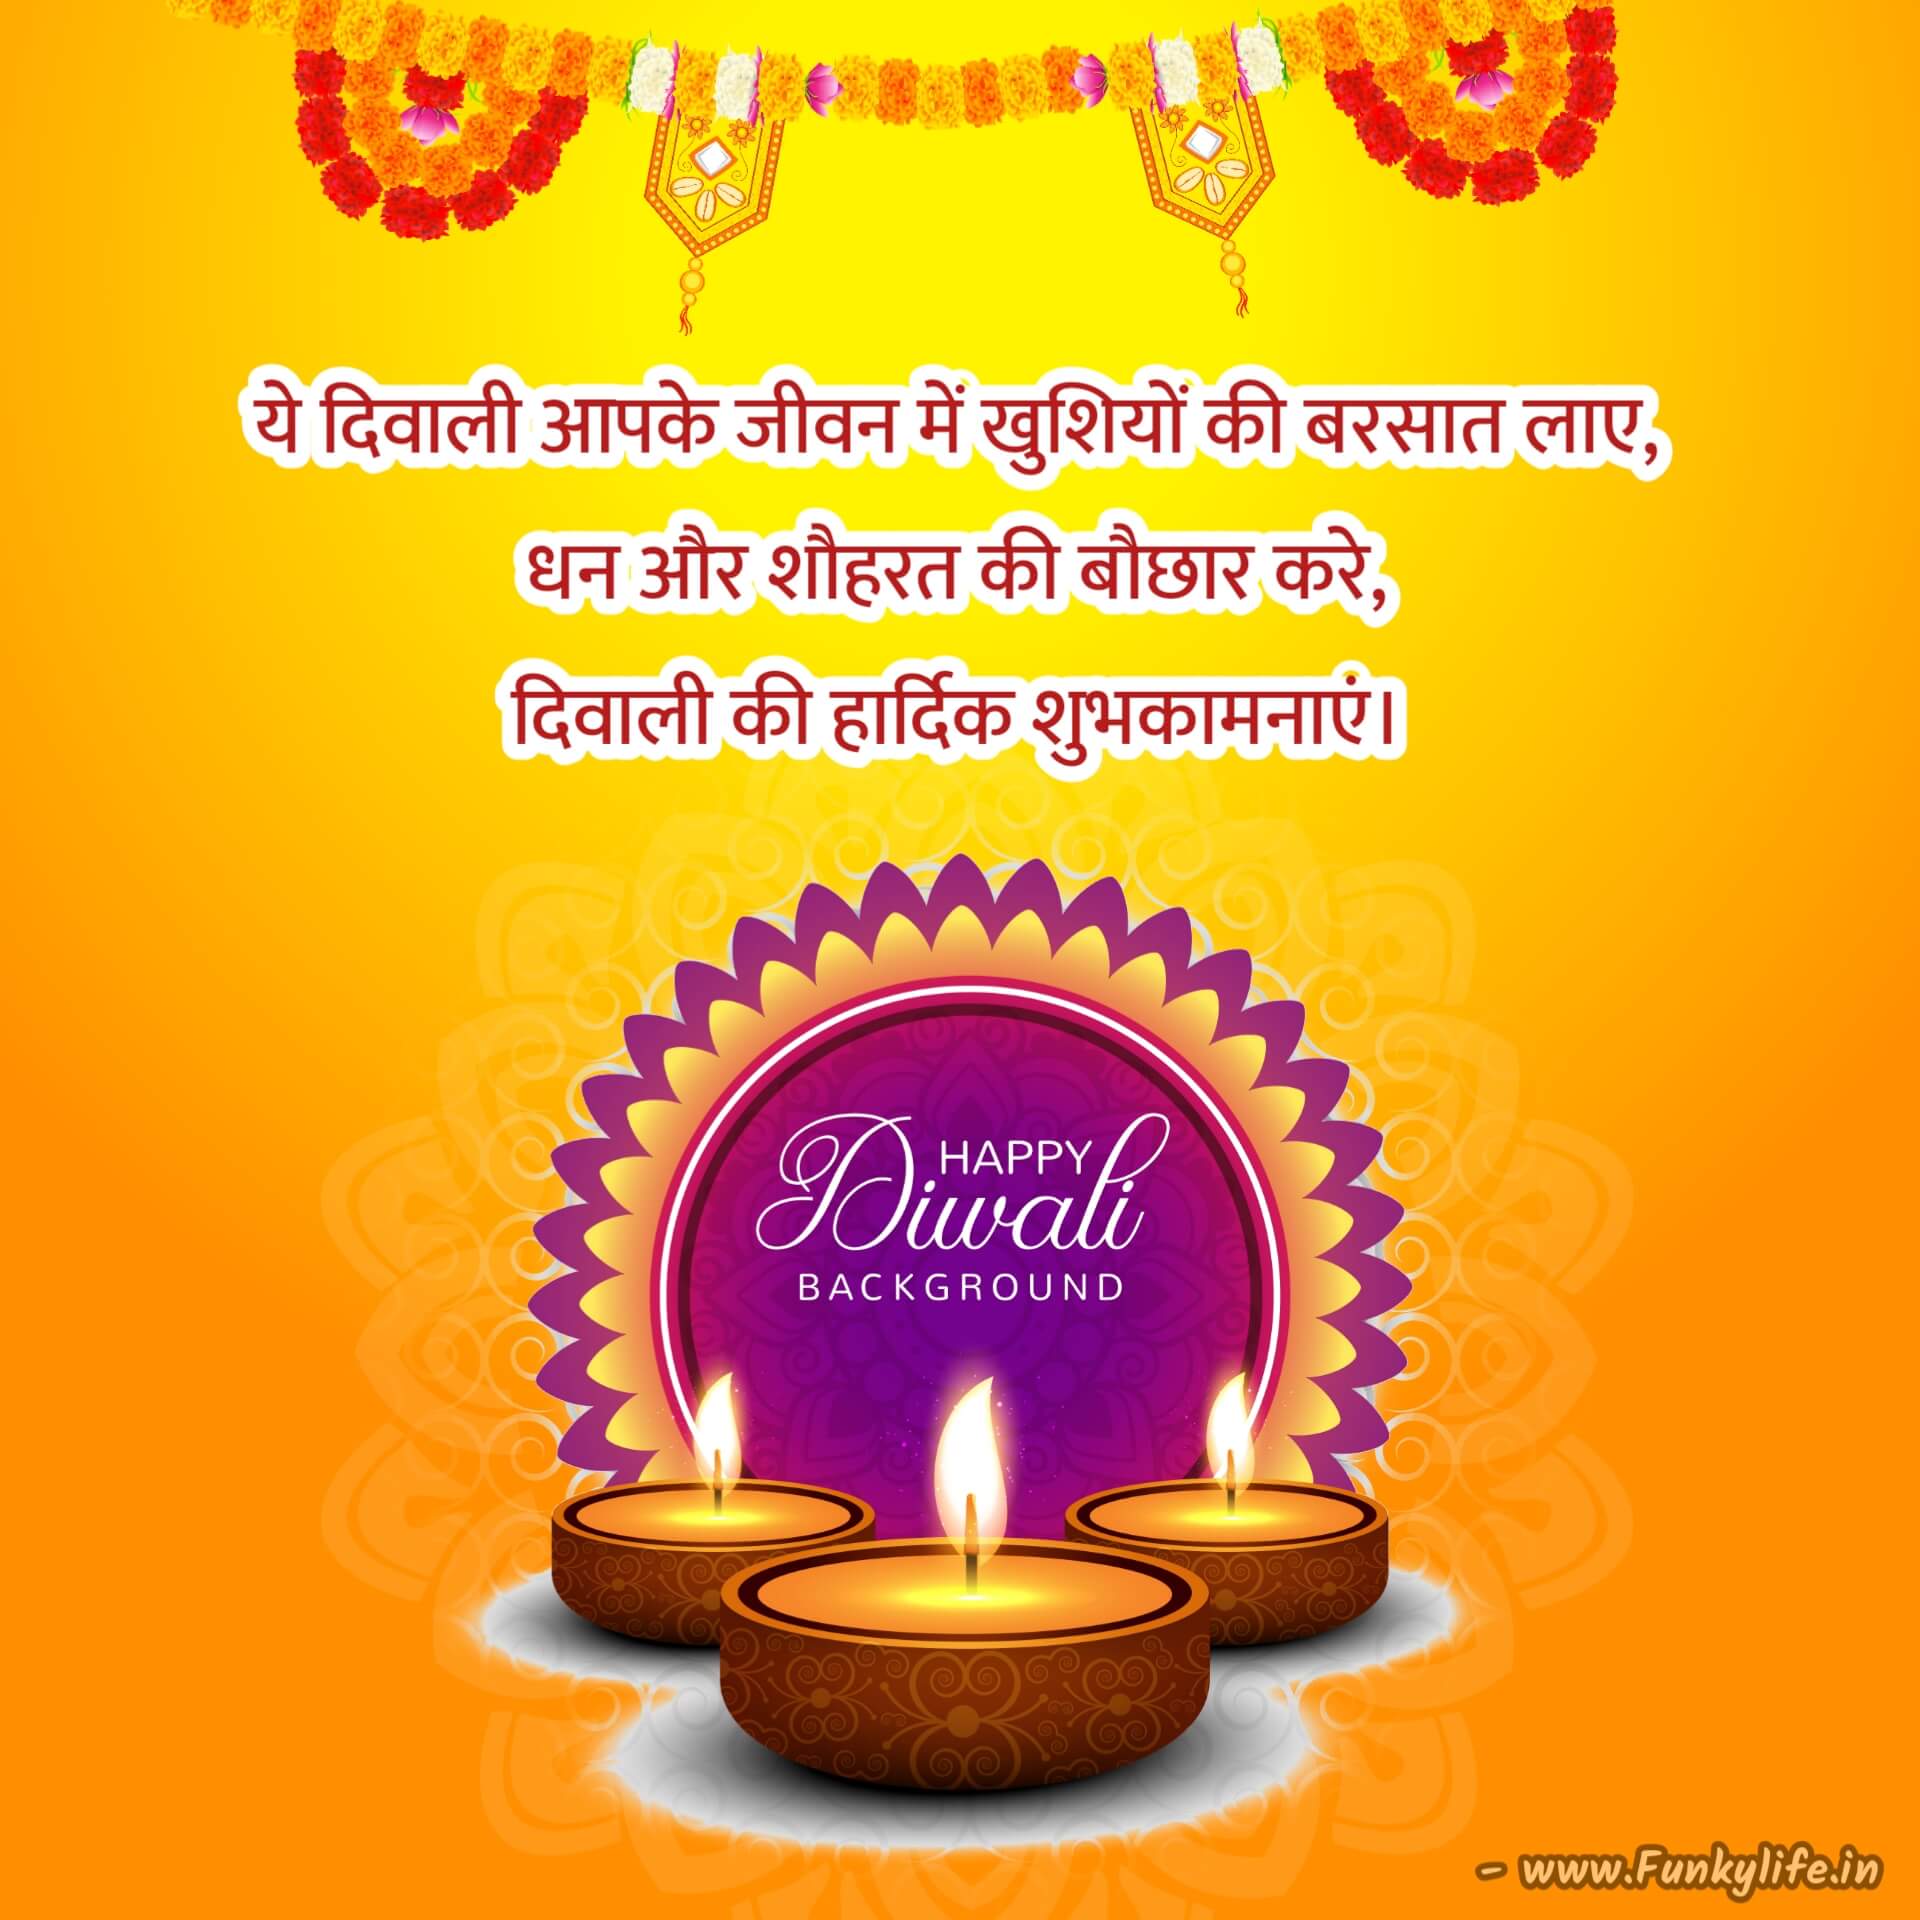 Diwali Wishes Messages in Hindi